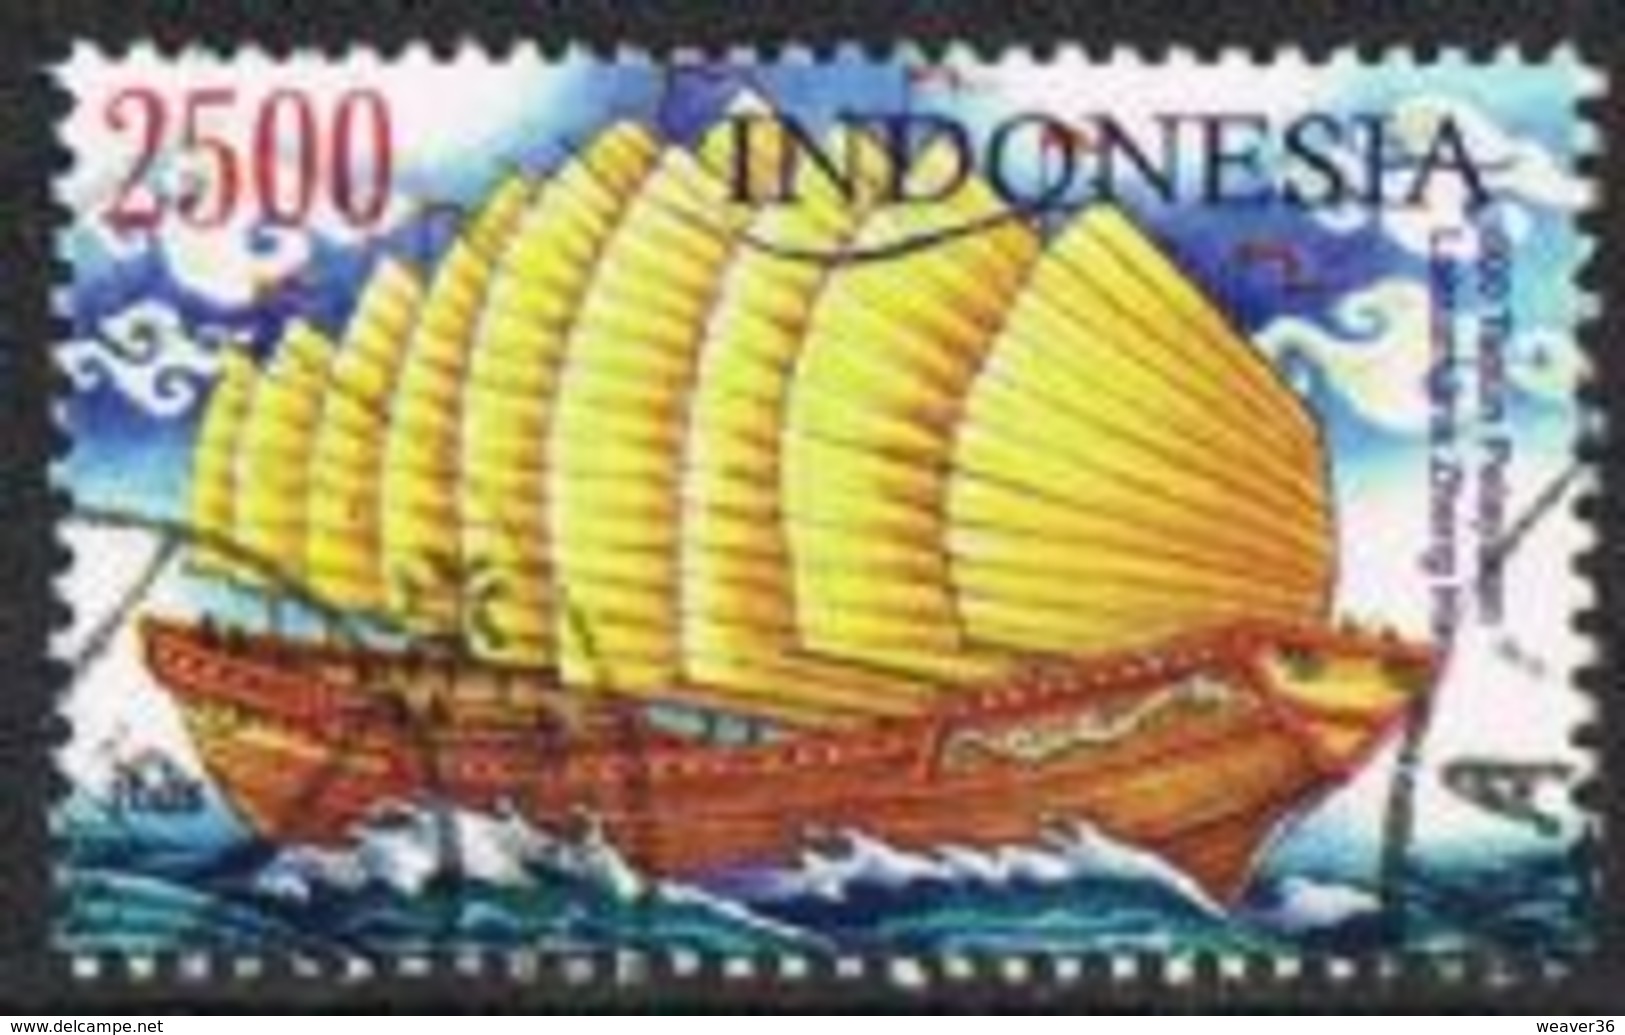 Indonesia 2005 Zheng Hes Voyage 2500r Good/fine Used [17/16296/ND] - Indonesia